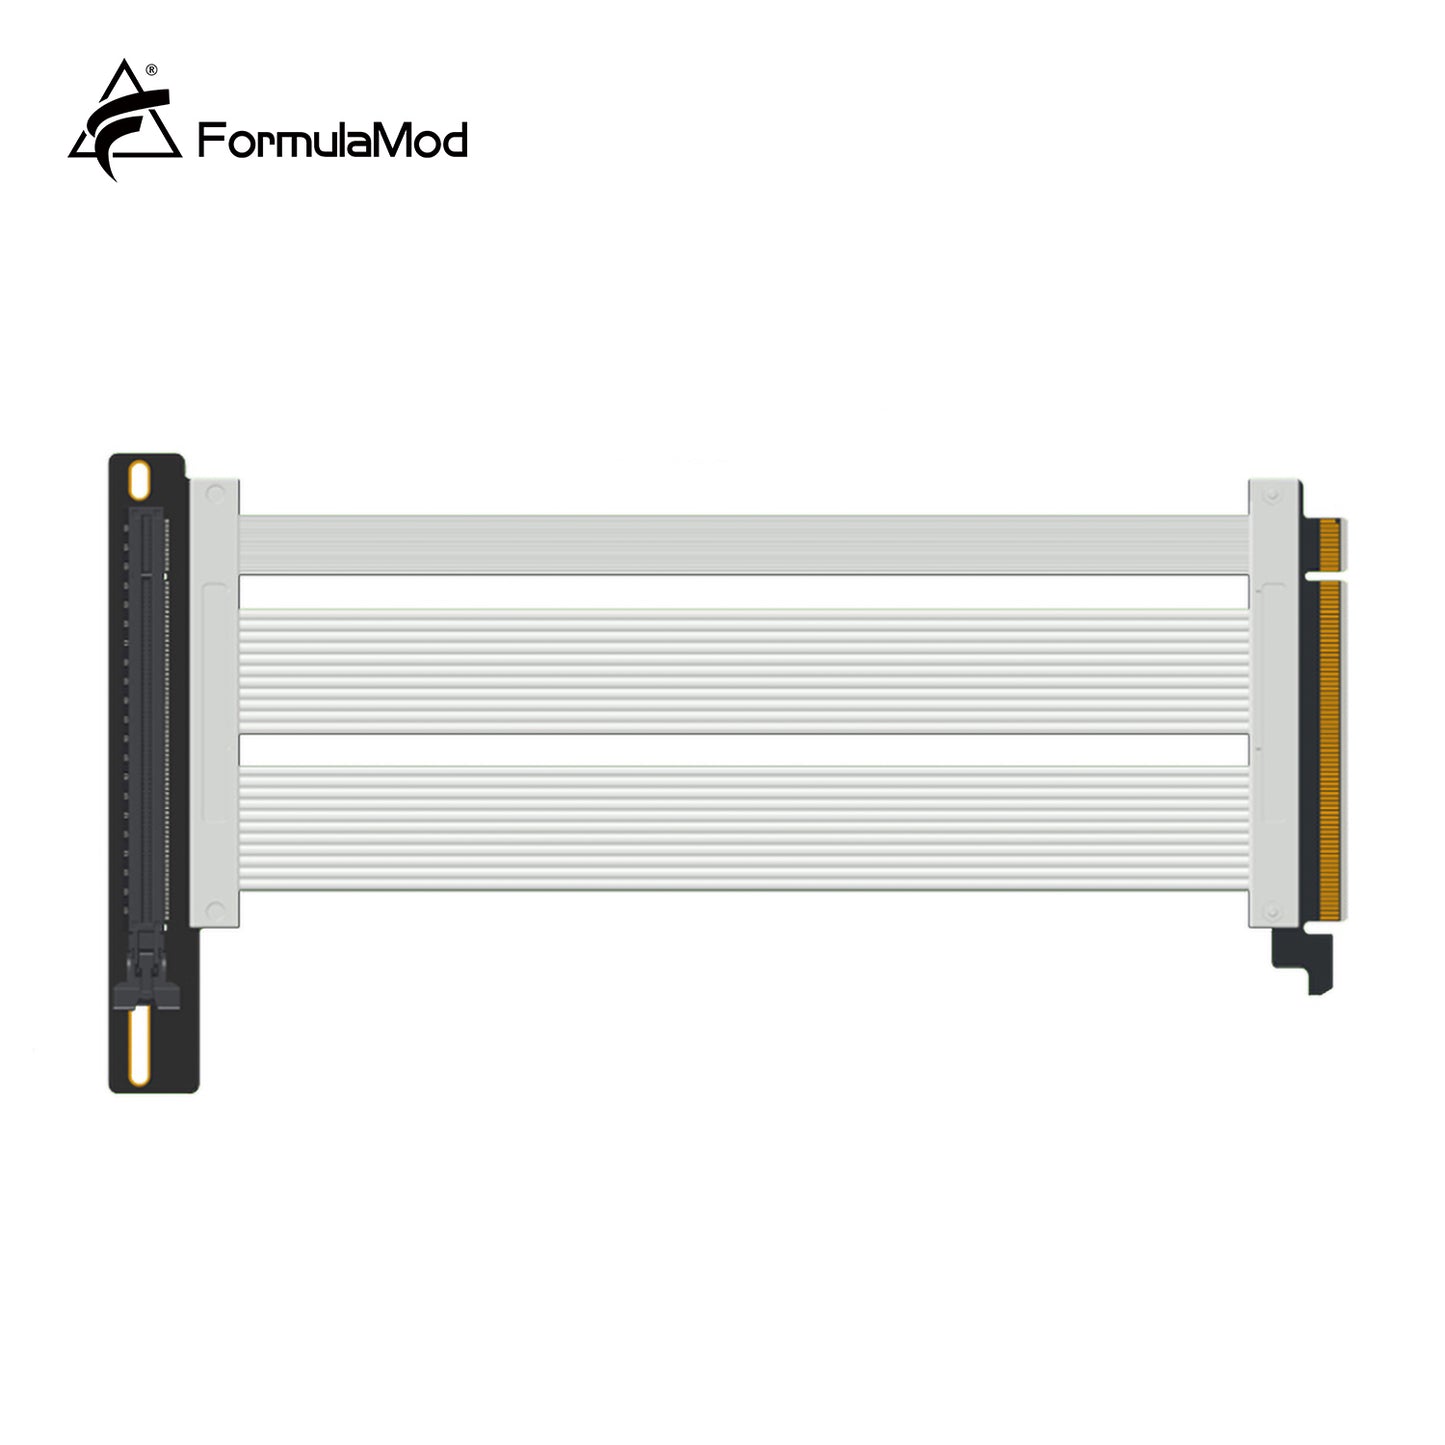 FormulaMod PCIe 4.0 Riser Cable Vertical Bracket Kit, Graphics Card Extension Cord Adapter With 90° Angle, Metal Vertical Install Holder, Fm-XKYCX